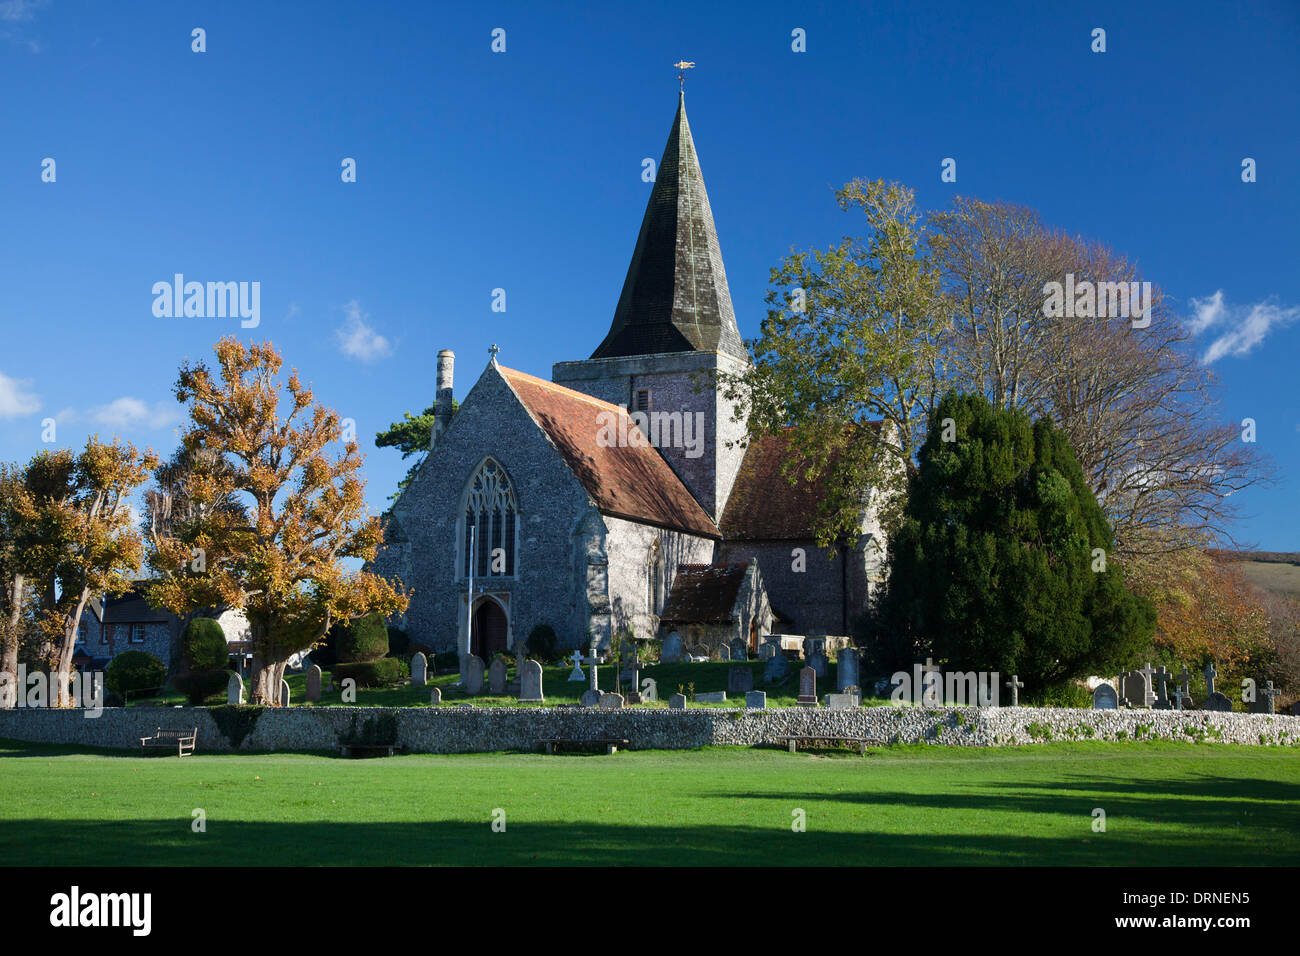 St Andrew's Church, also known as the Cathedral of the Downs, Alfriston, County Sussex, England. Stock Photo